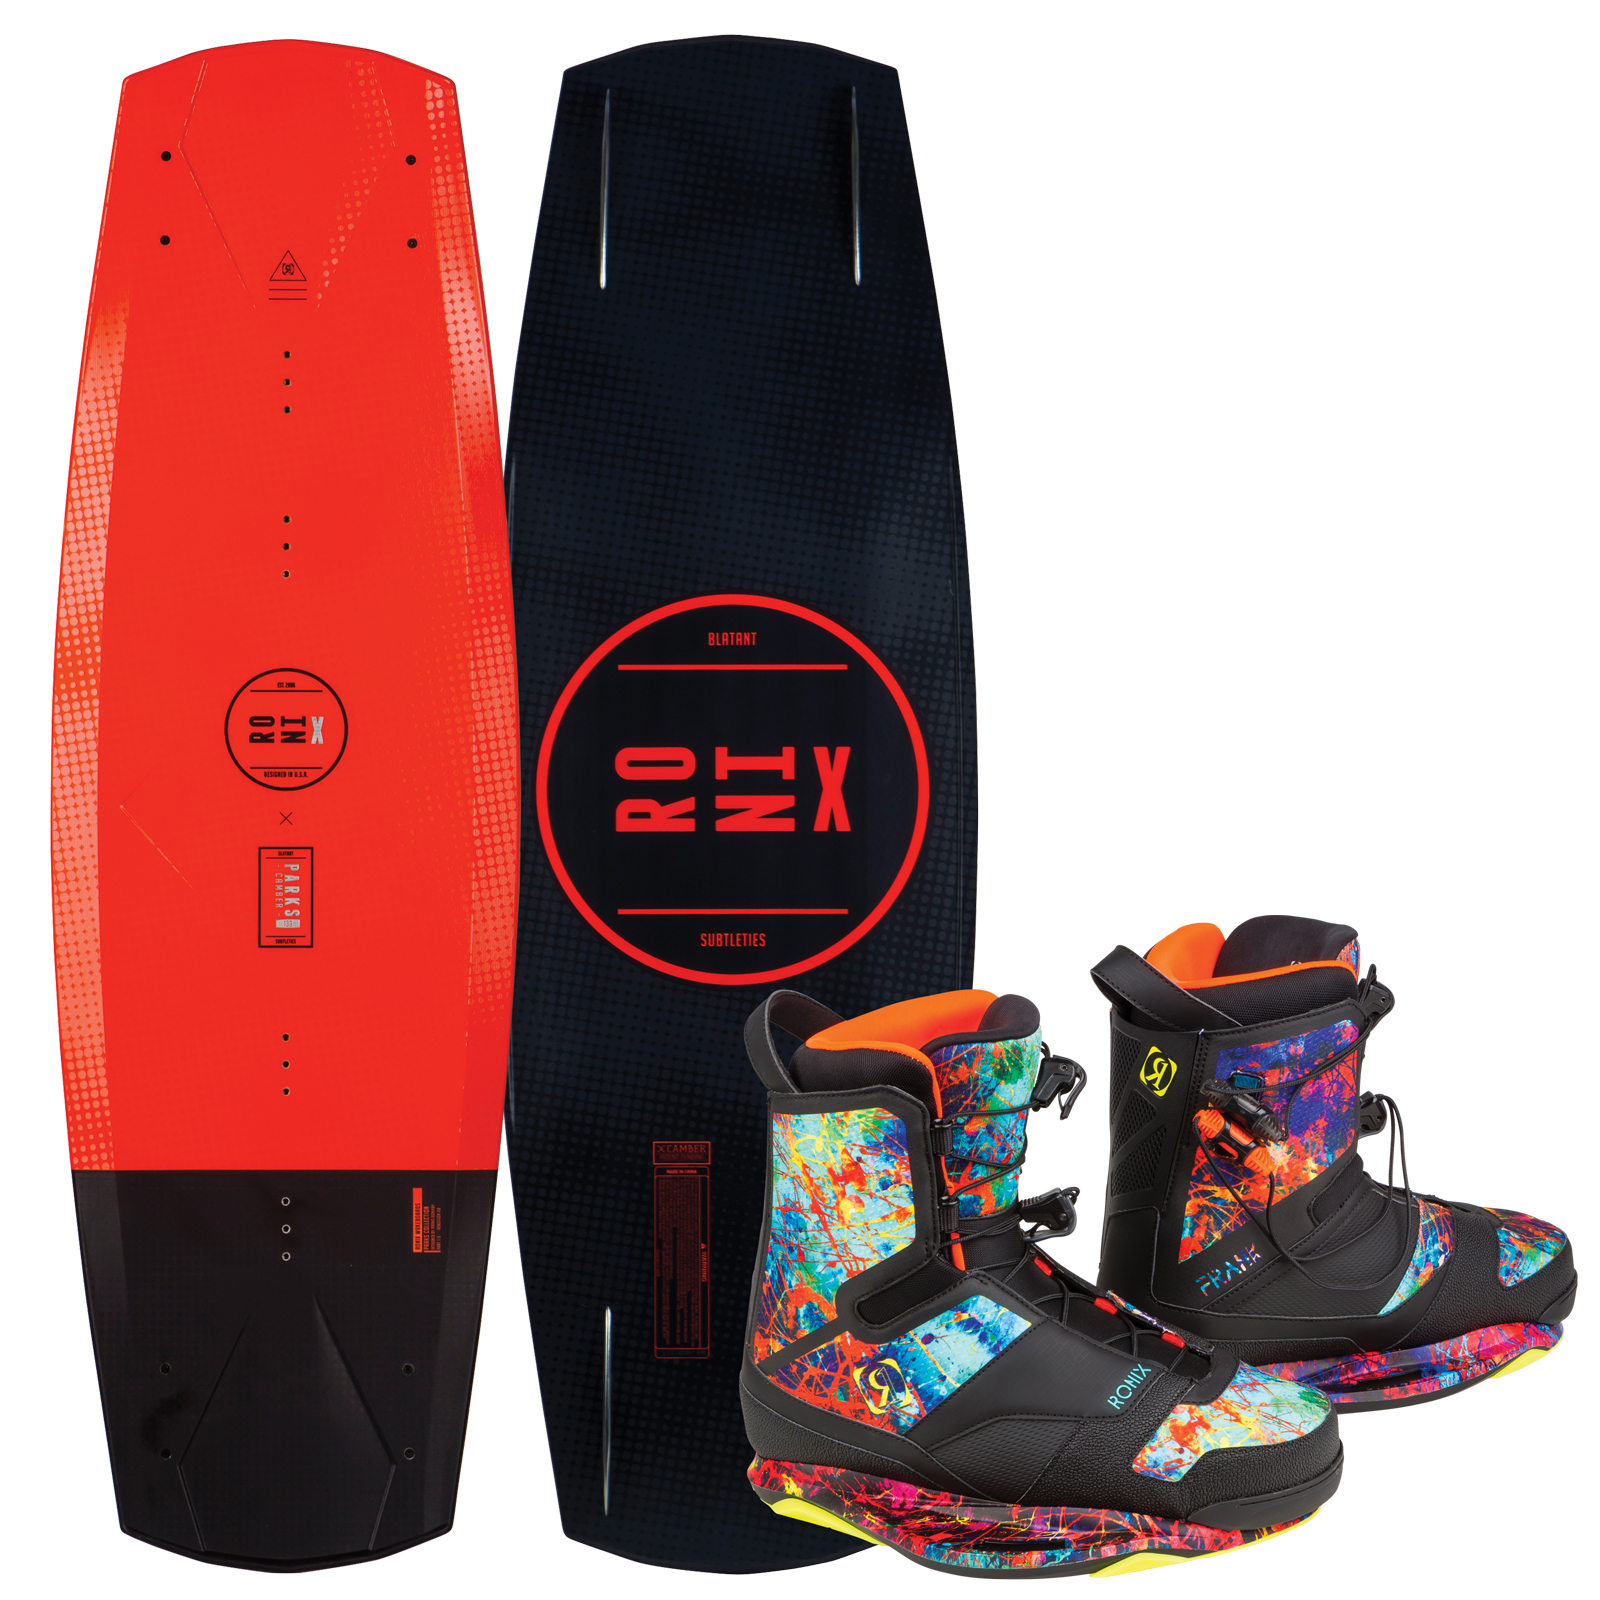   PARKS MODELLO 139 W/ FRANK PACKAGE RONIX 2017